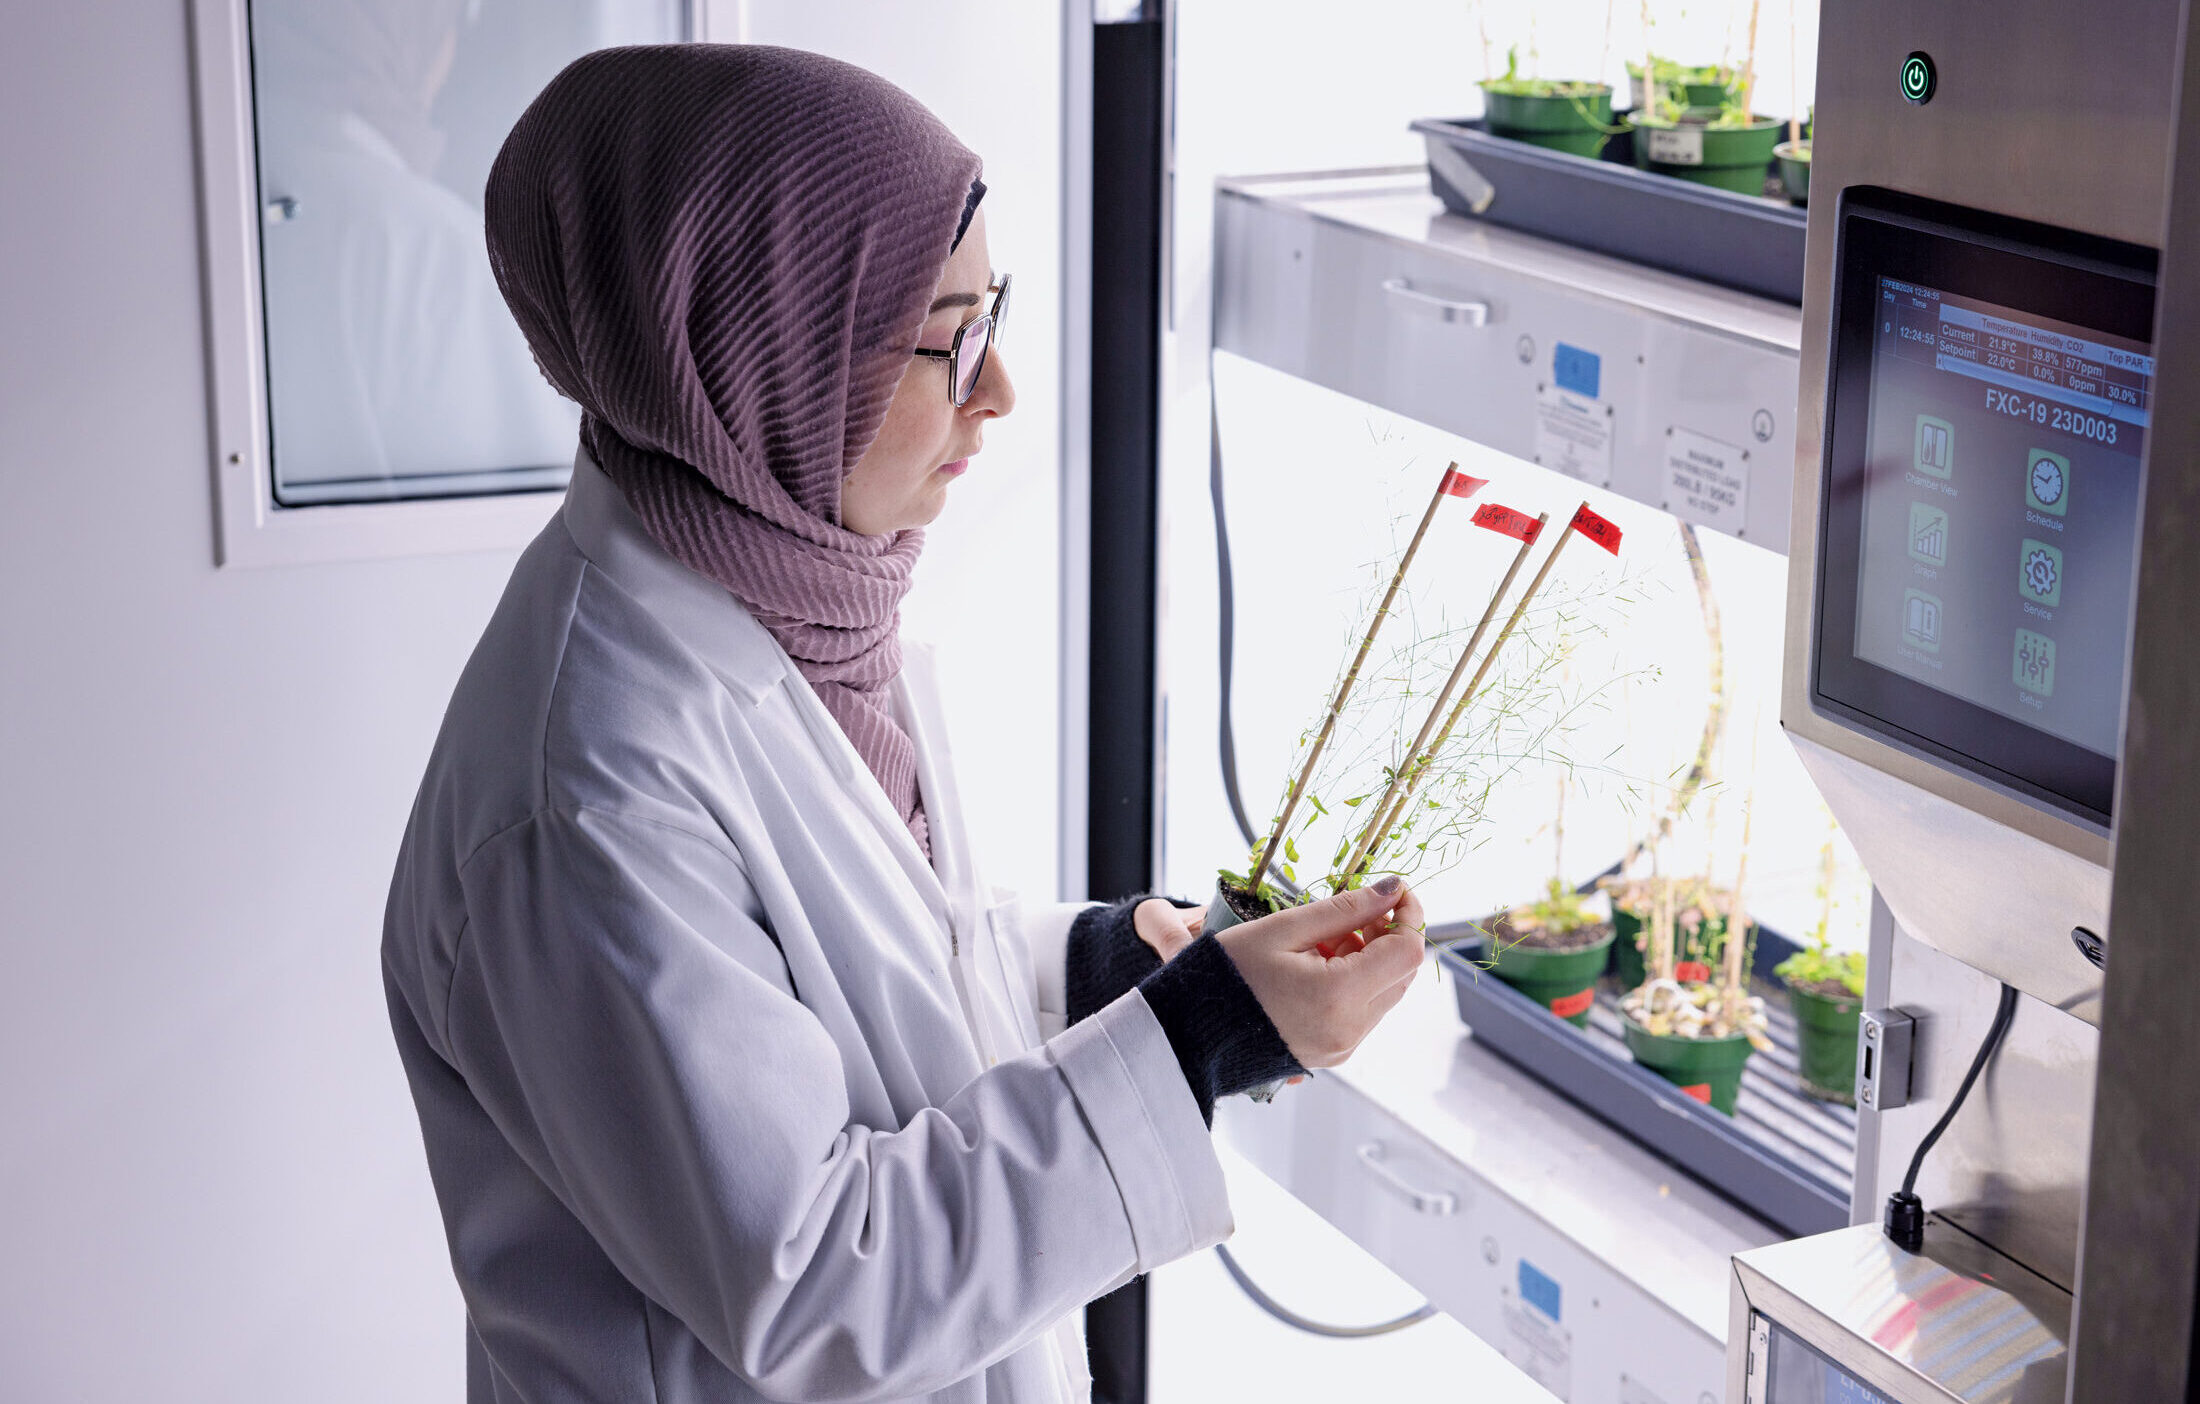 Jenan Noureddine, wearing a white lab coat and a khimar, is holding up and examining a potted plant in a well-lit room with a monitor displaying temperature, humidity and CO2 readings.